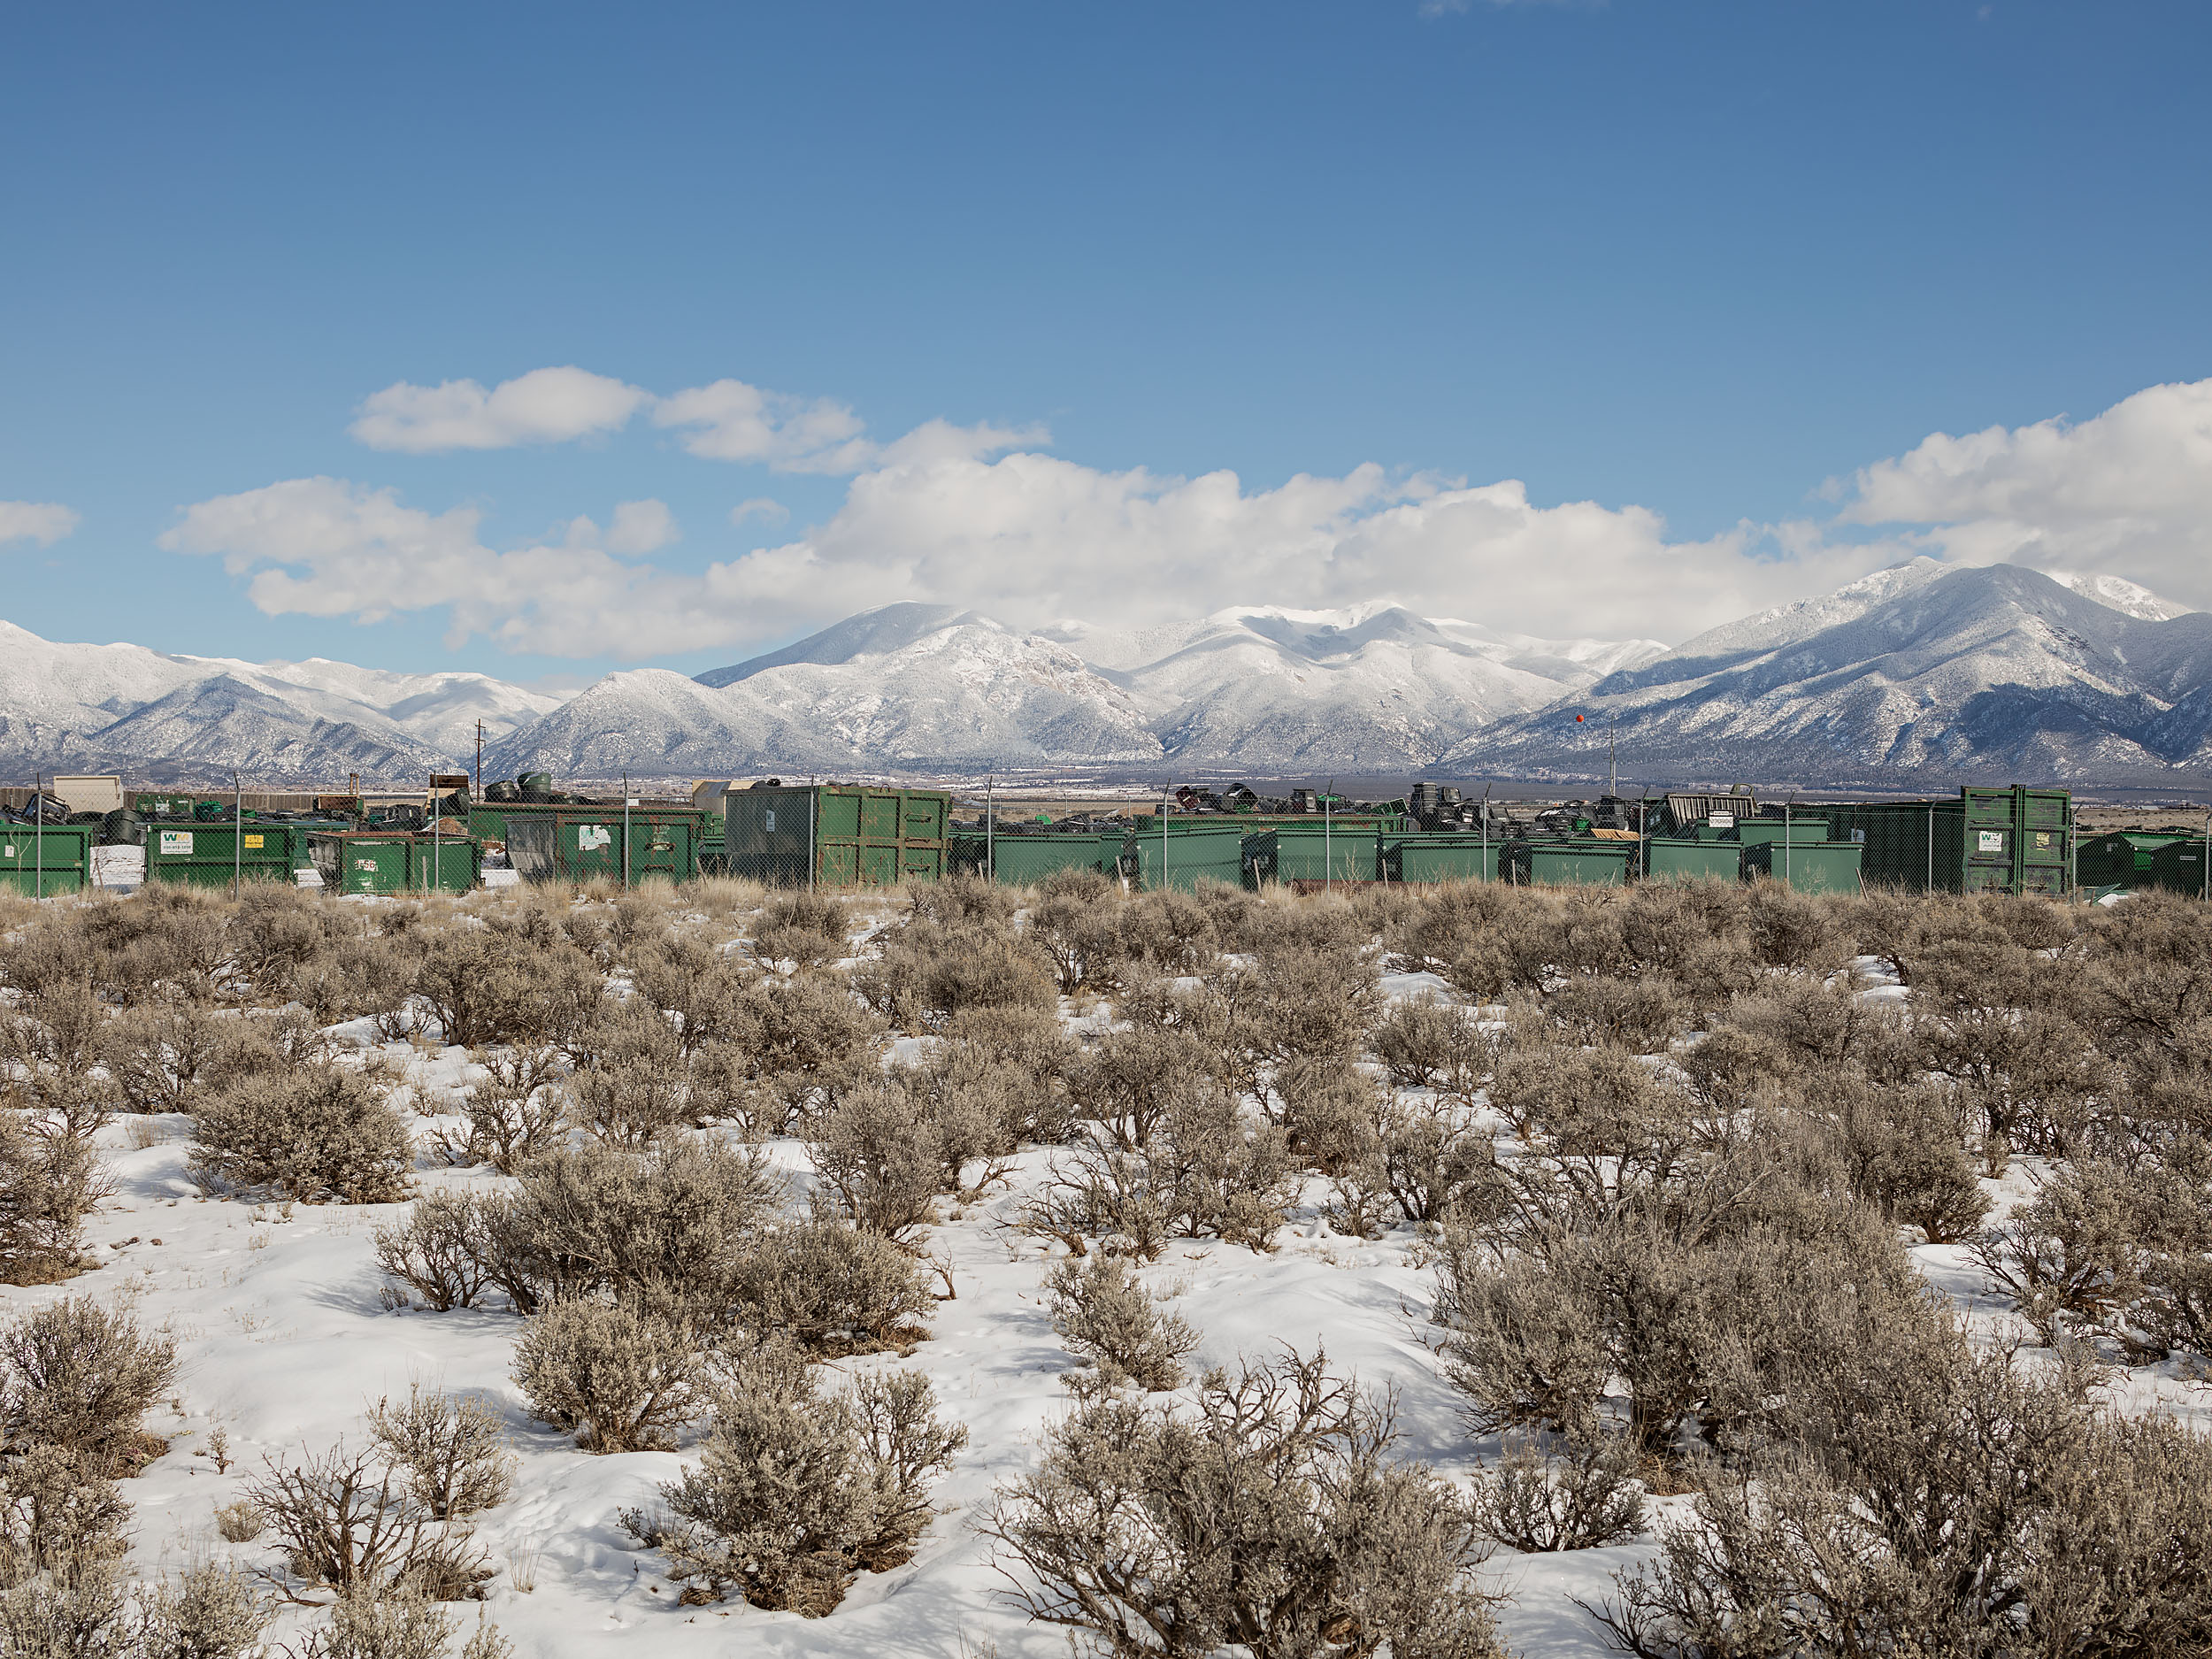 Waste Management Dumpster Yard and Sangre De Cristo Mountains - Taos, NM